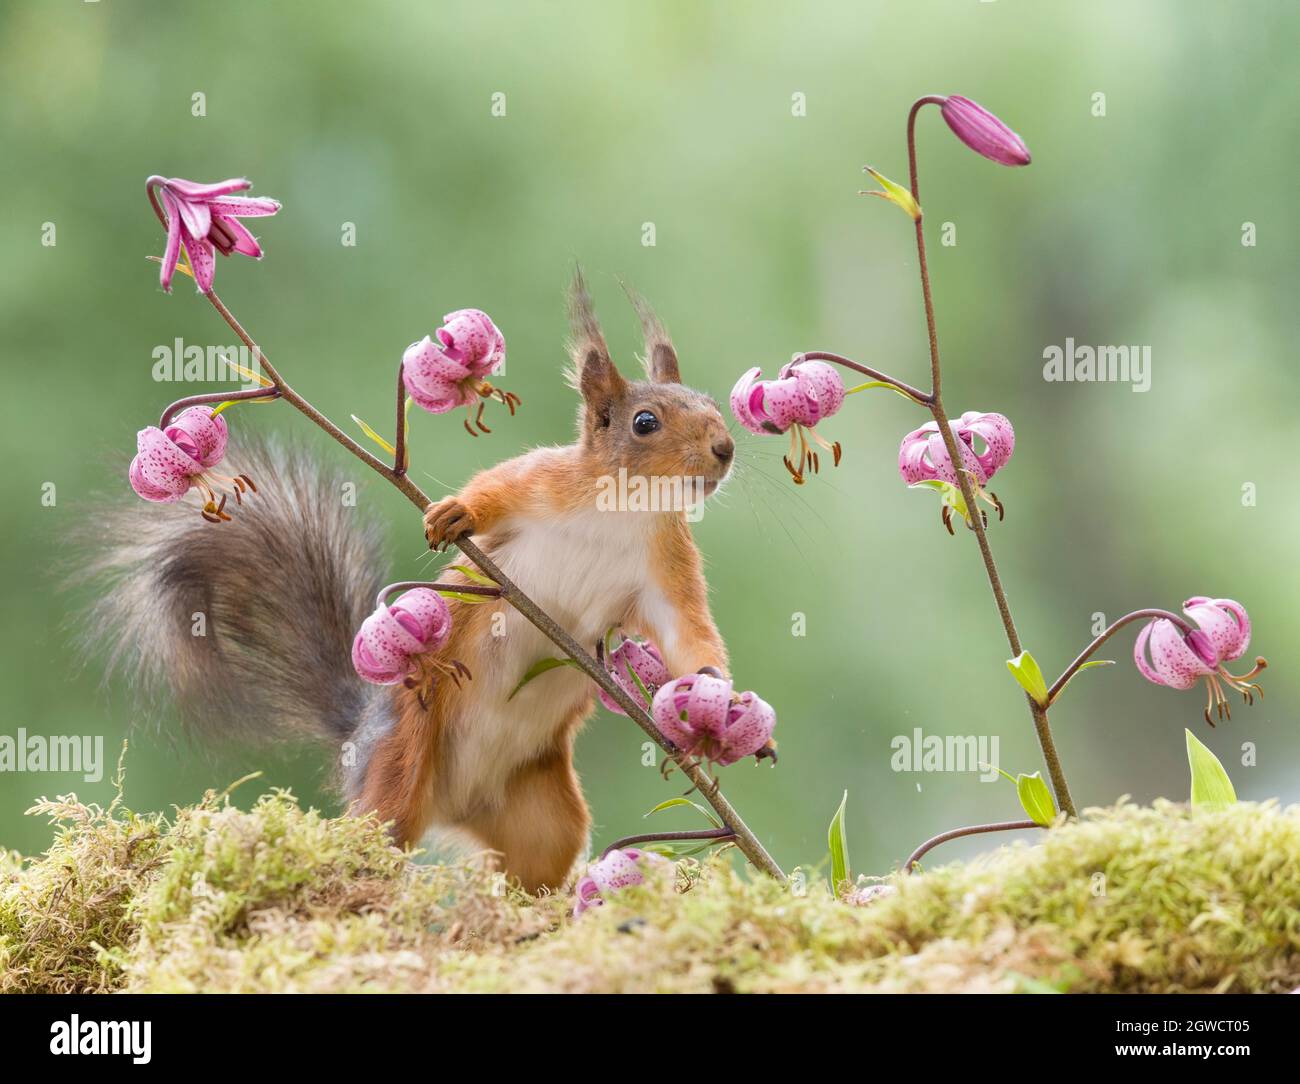 red squirrel leaning on a lily Stock Photo